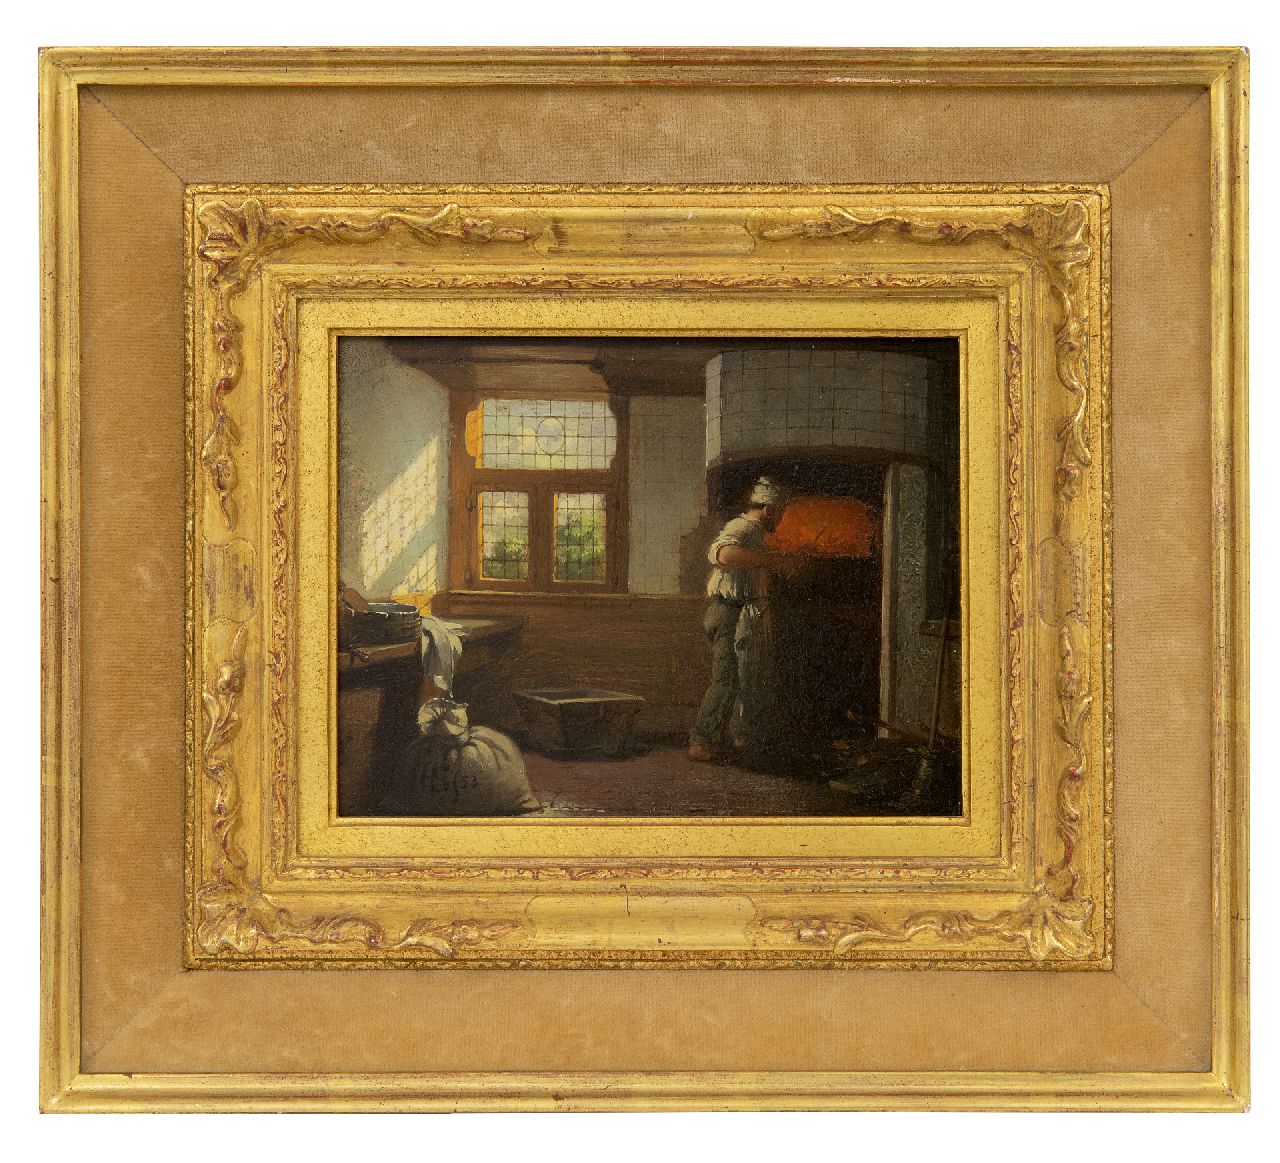 Scheeres H.J.  | Hendricus Johannes Scheeres, A baker at work, oil on panel 13.3 x 17.1 cm, signed l.l. with monogram and dated '53